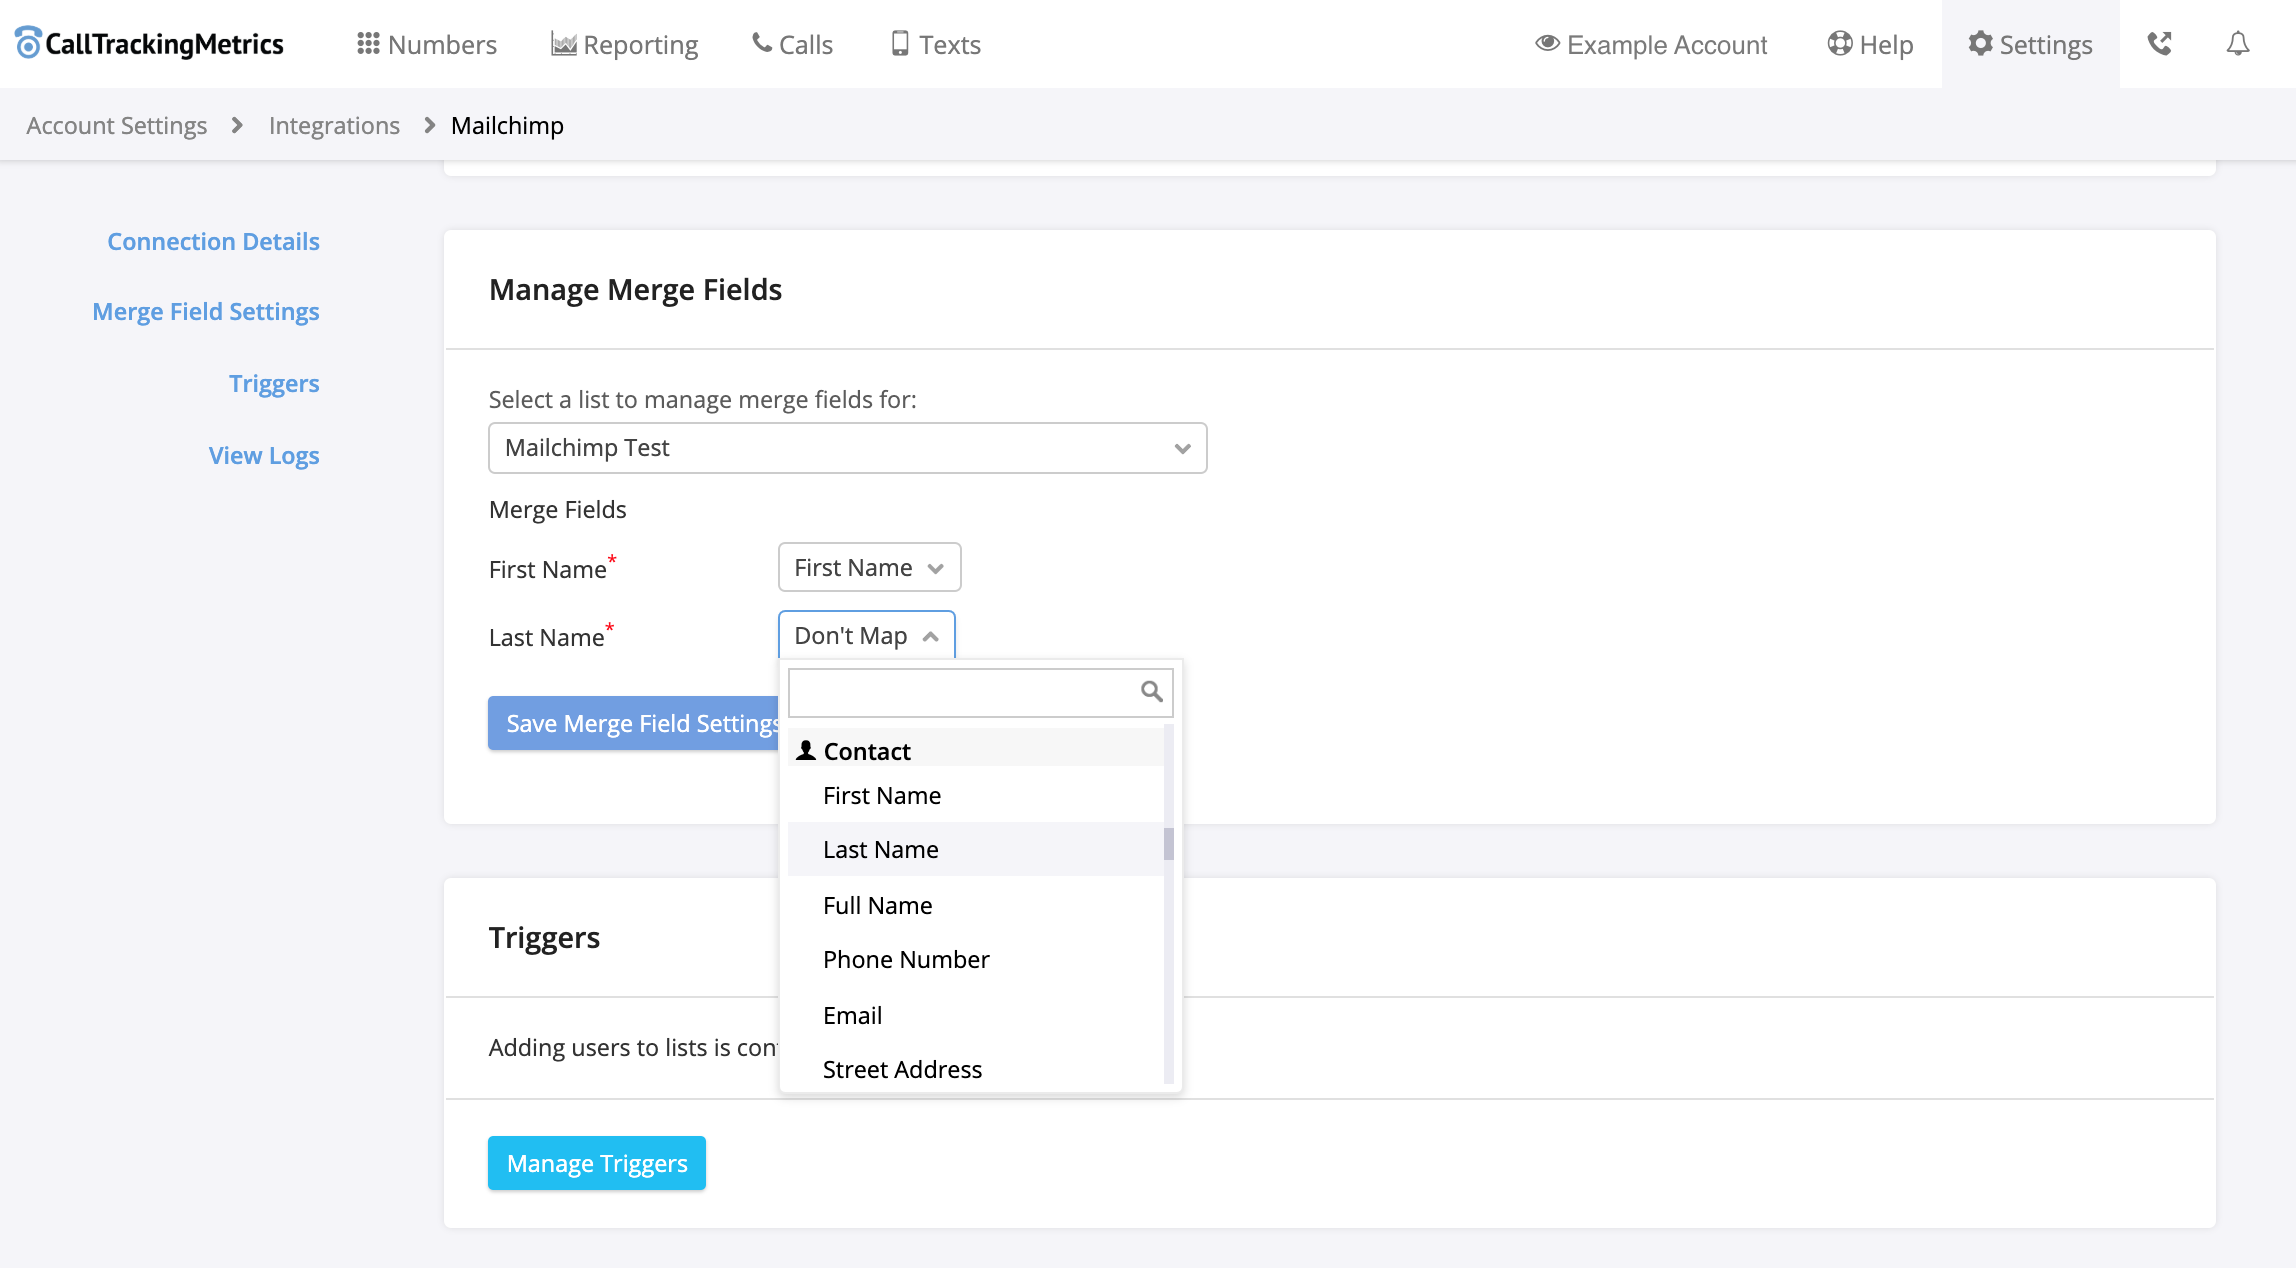 Image_2_-_Help-Mailchimp-Manage-Merge-Fields-2-1.png